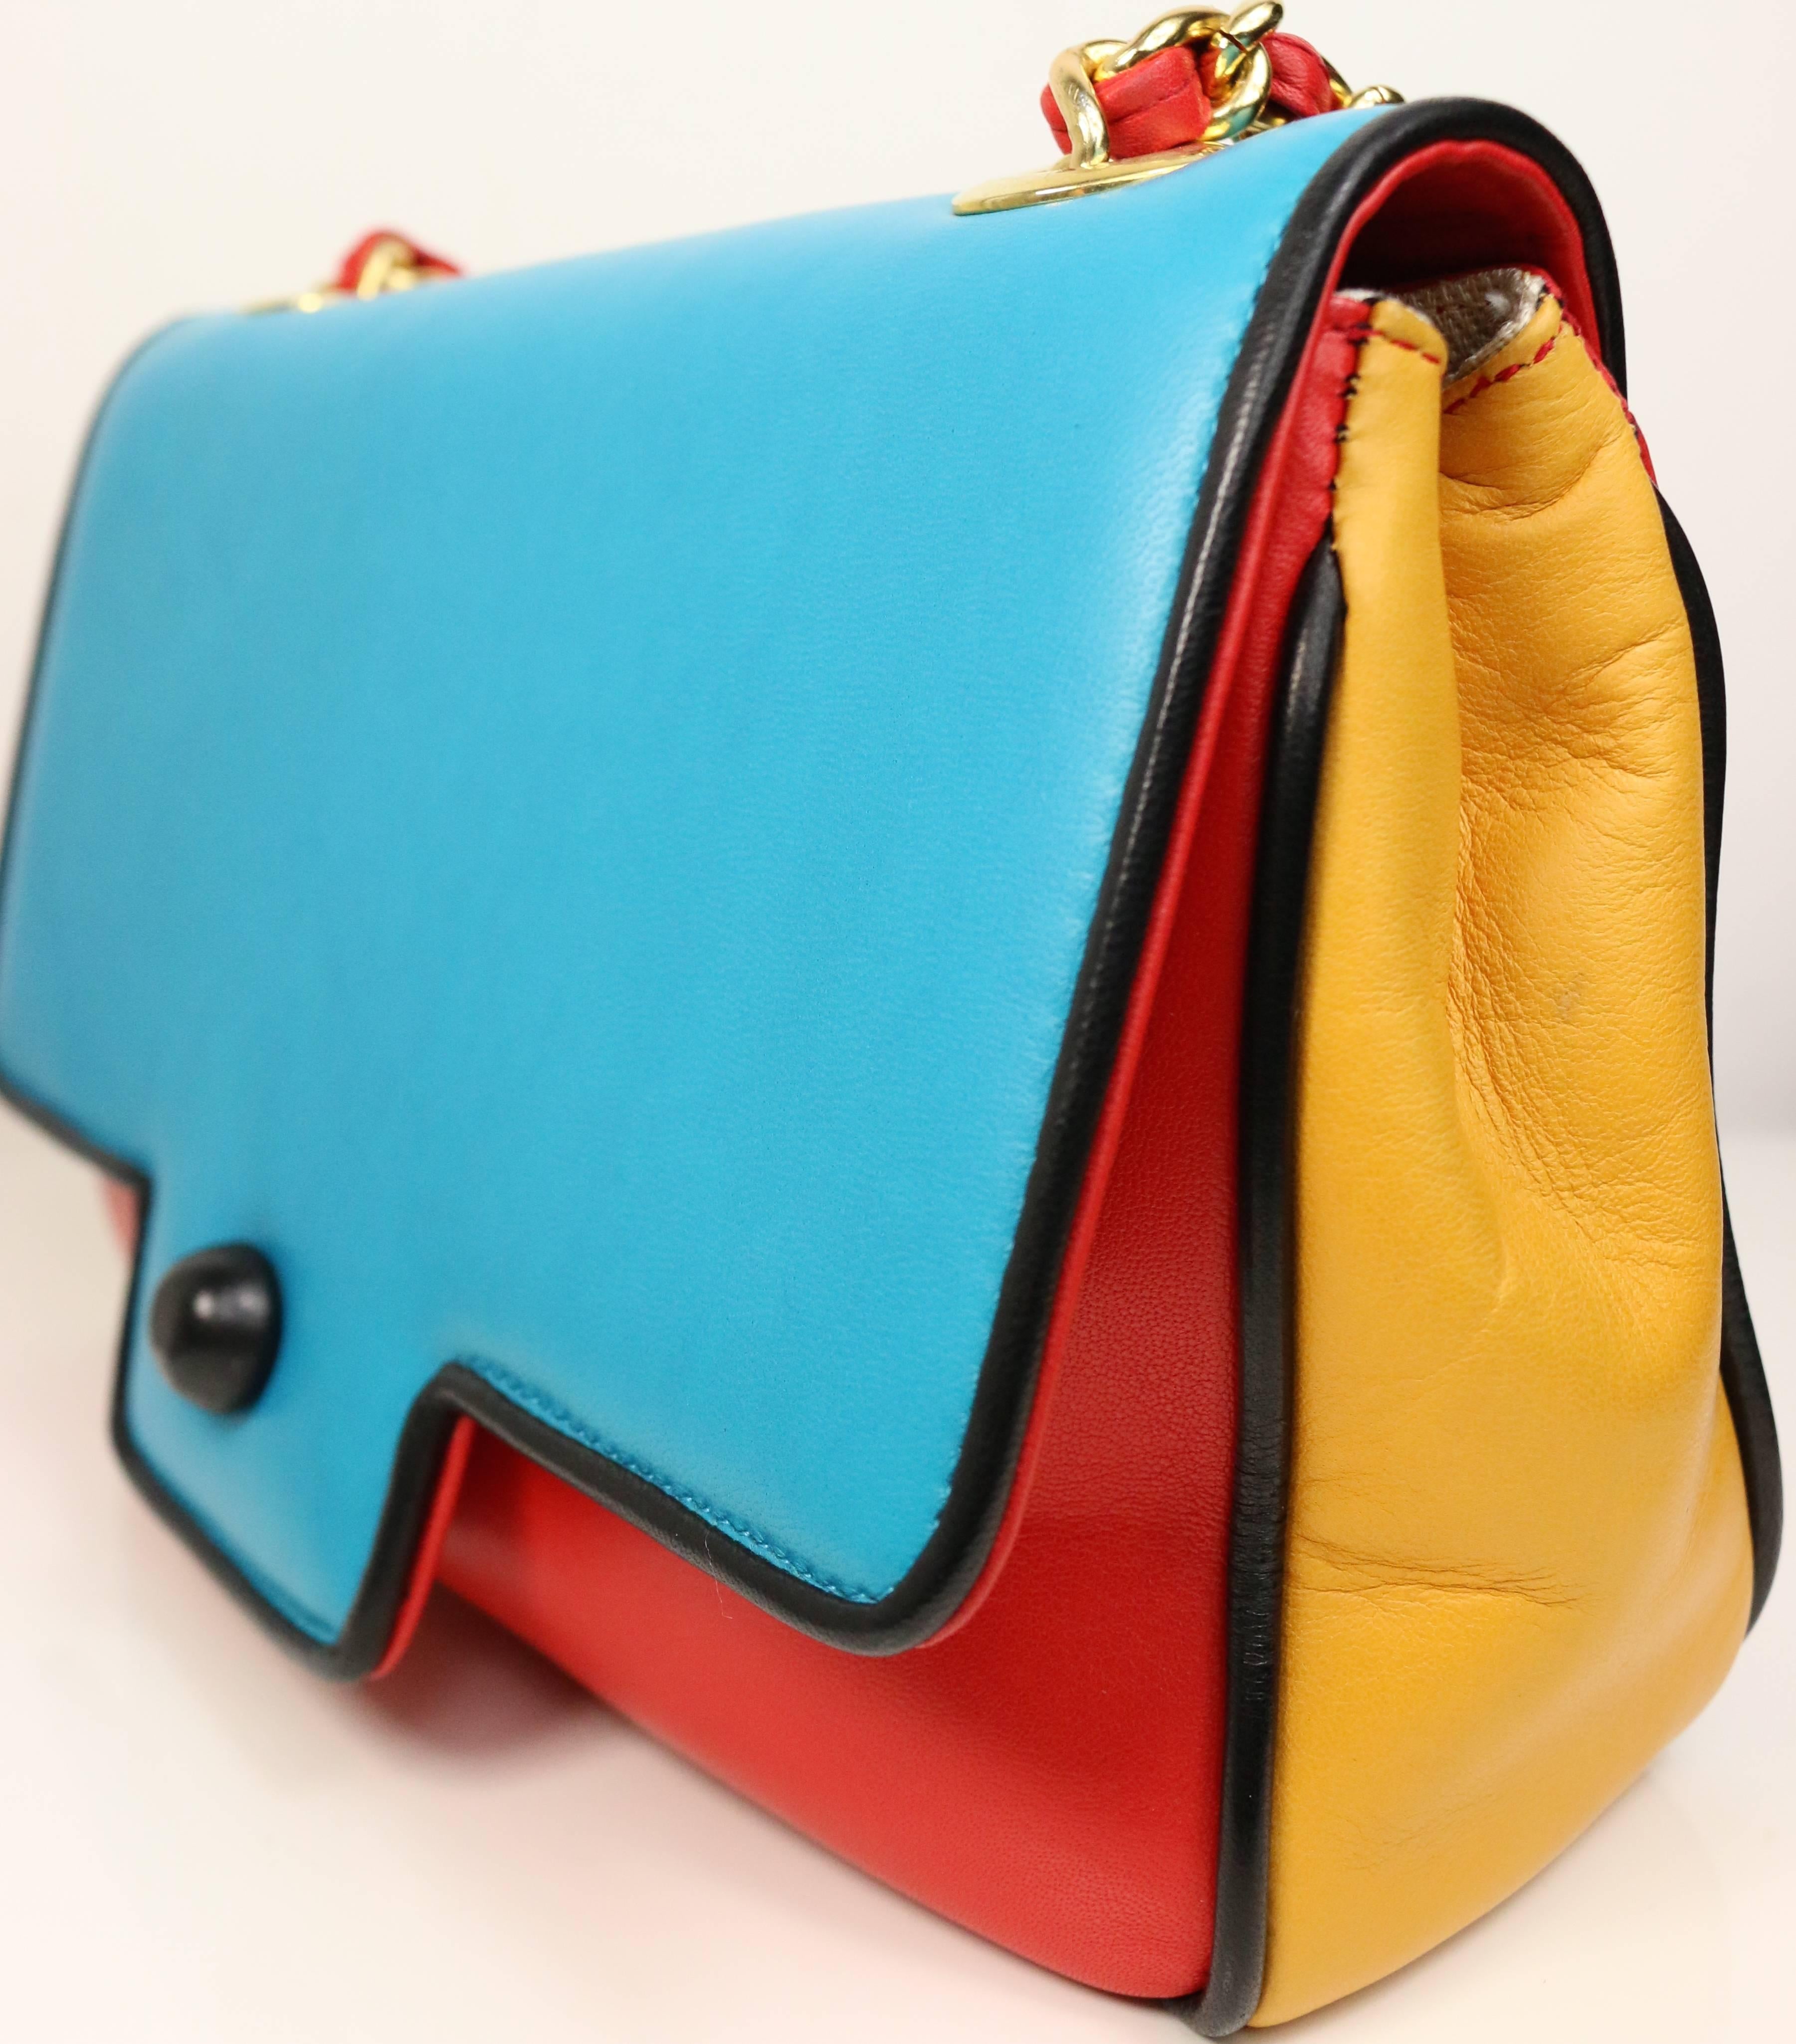 - Vintage 80s Pancaldi colour blocked(turquoise/red/yellow) leather with black piping trim red leather gold chain strap crossbody bag. Linen Fabric interior. 

- Length: 8in, Height: 5.5in, Strap: 22in. 

- Made in Italy. 